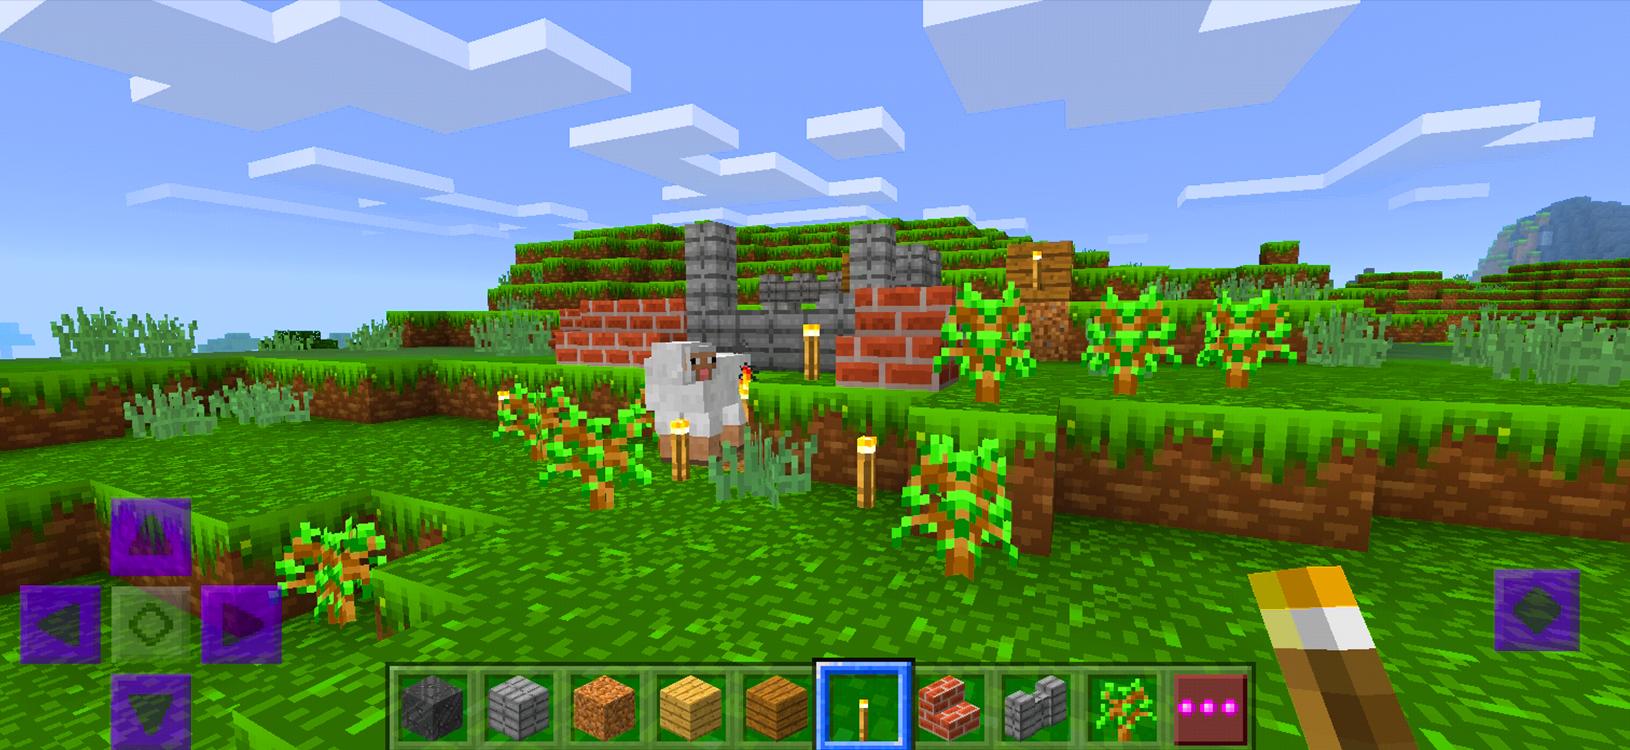 Download Minecraft – Pocket Edition 0.8.0 for iOS